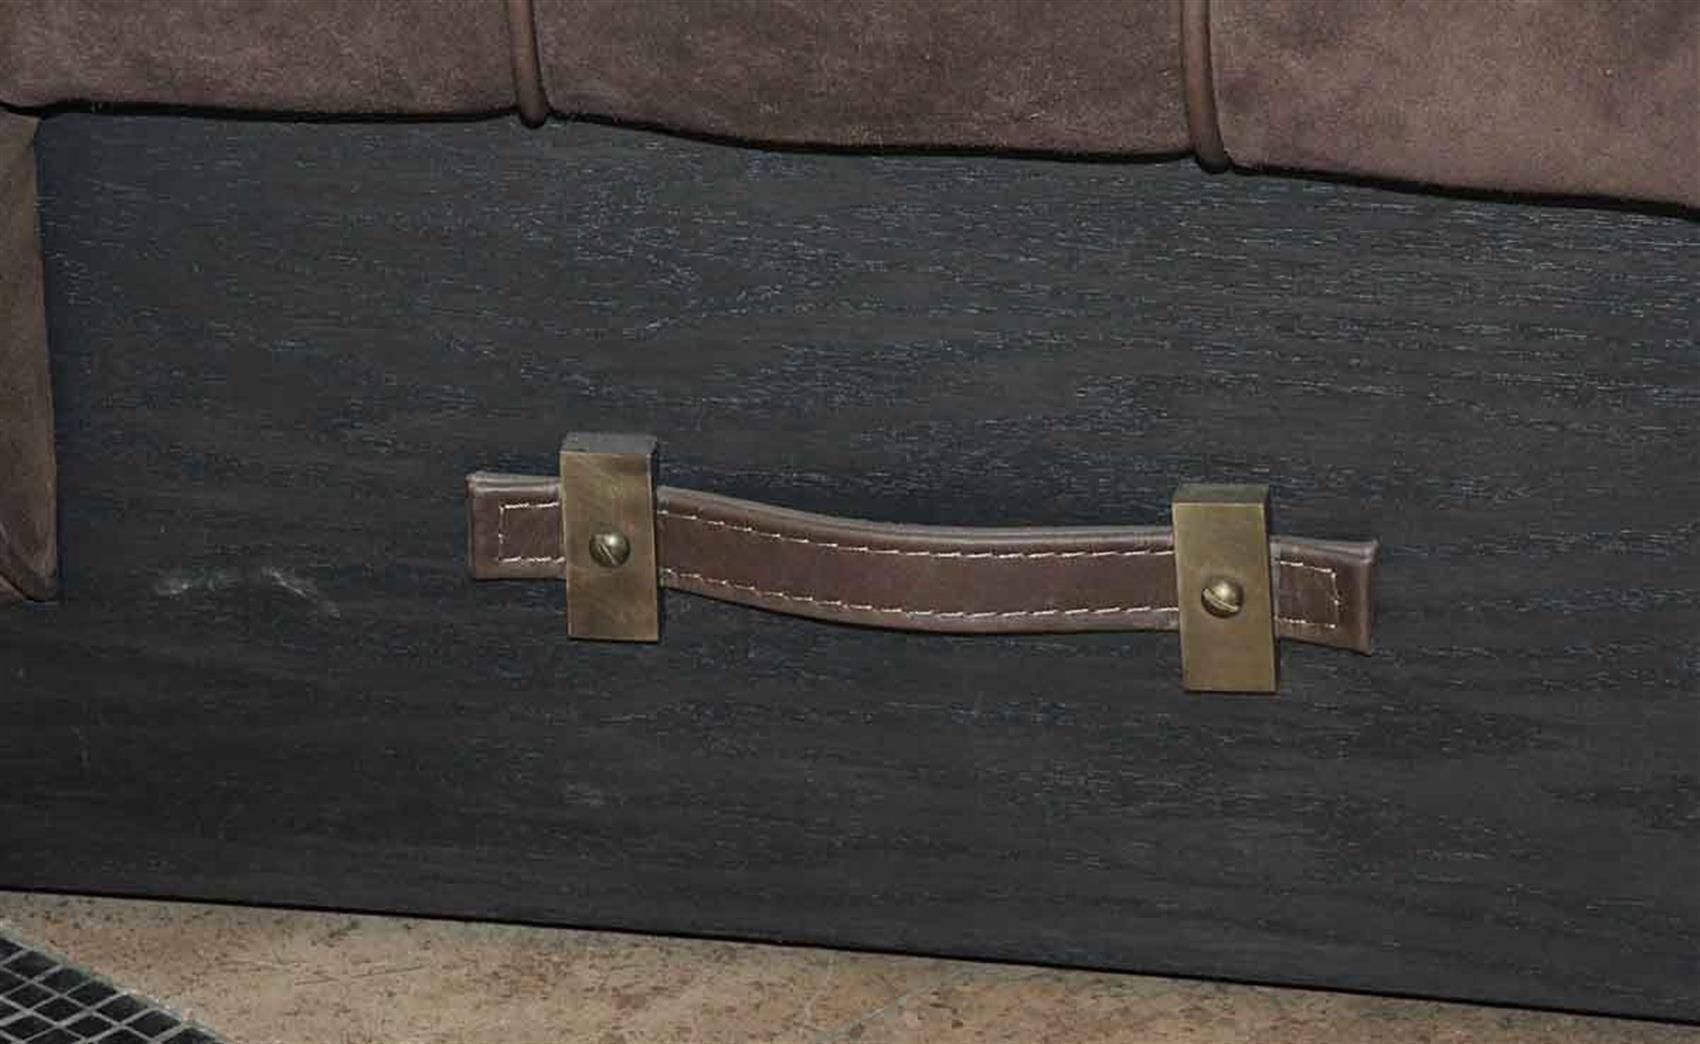 Late 20th Century 1990s Warm Brown Suede Leather Ottoman with a Wooden Base and a Leather Handle